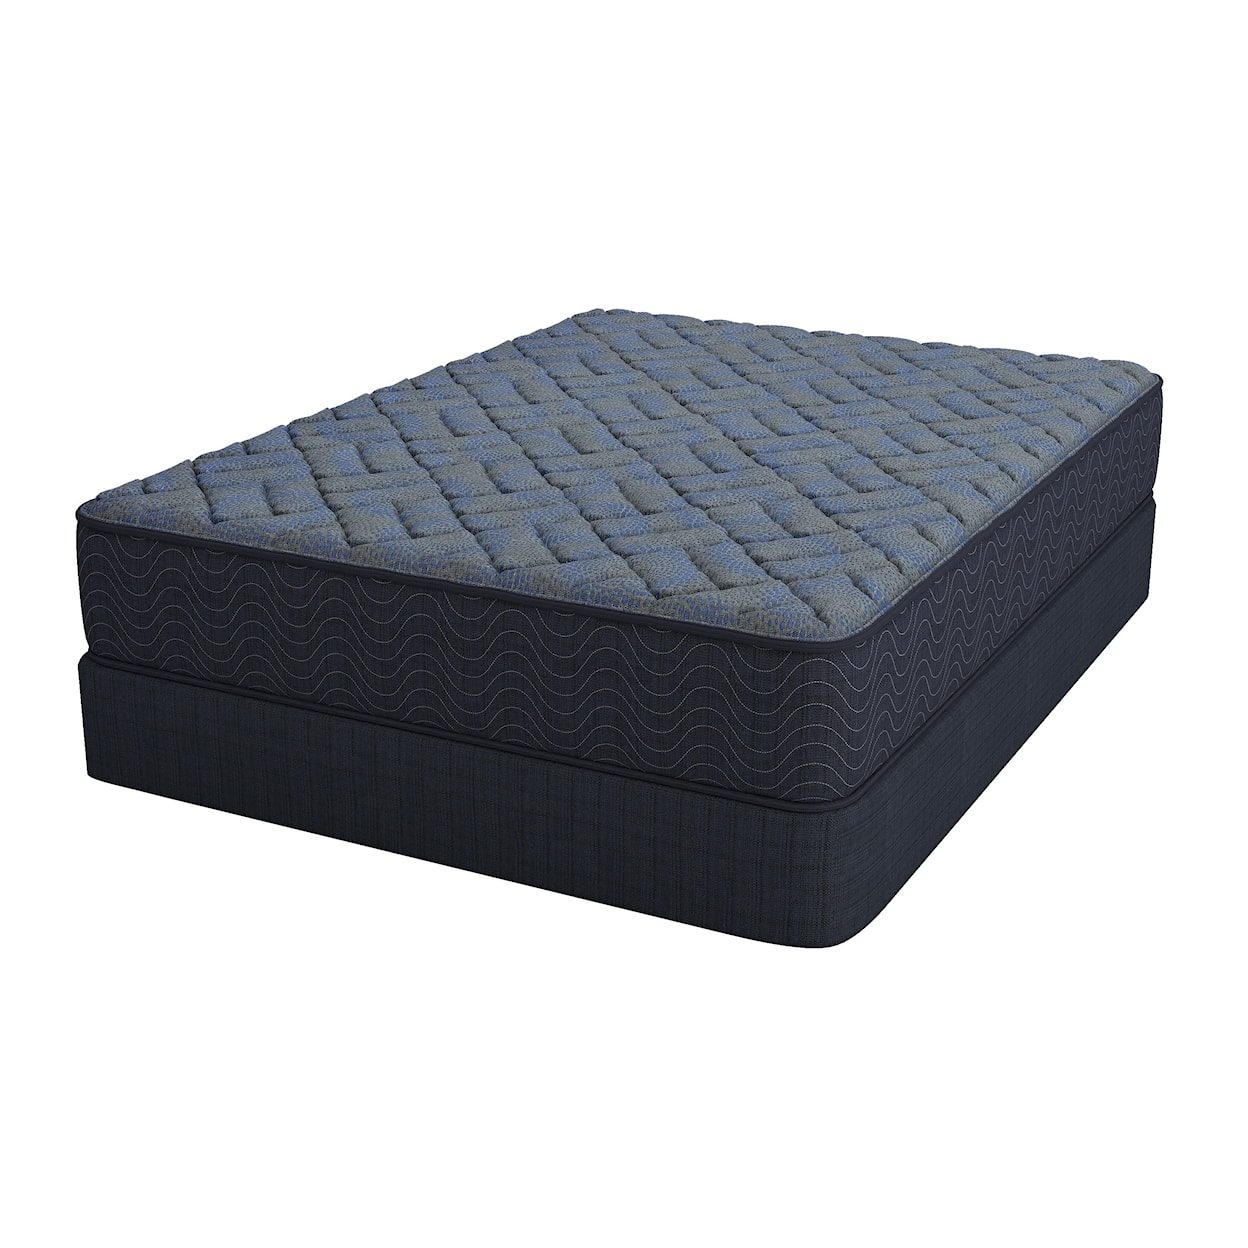 Southerland Bedding Co. Brantley Firm Twin Brantley Firm Mattress